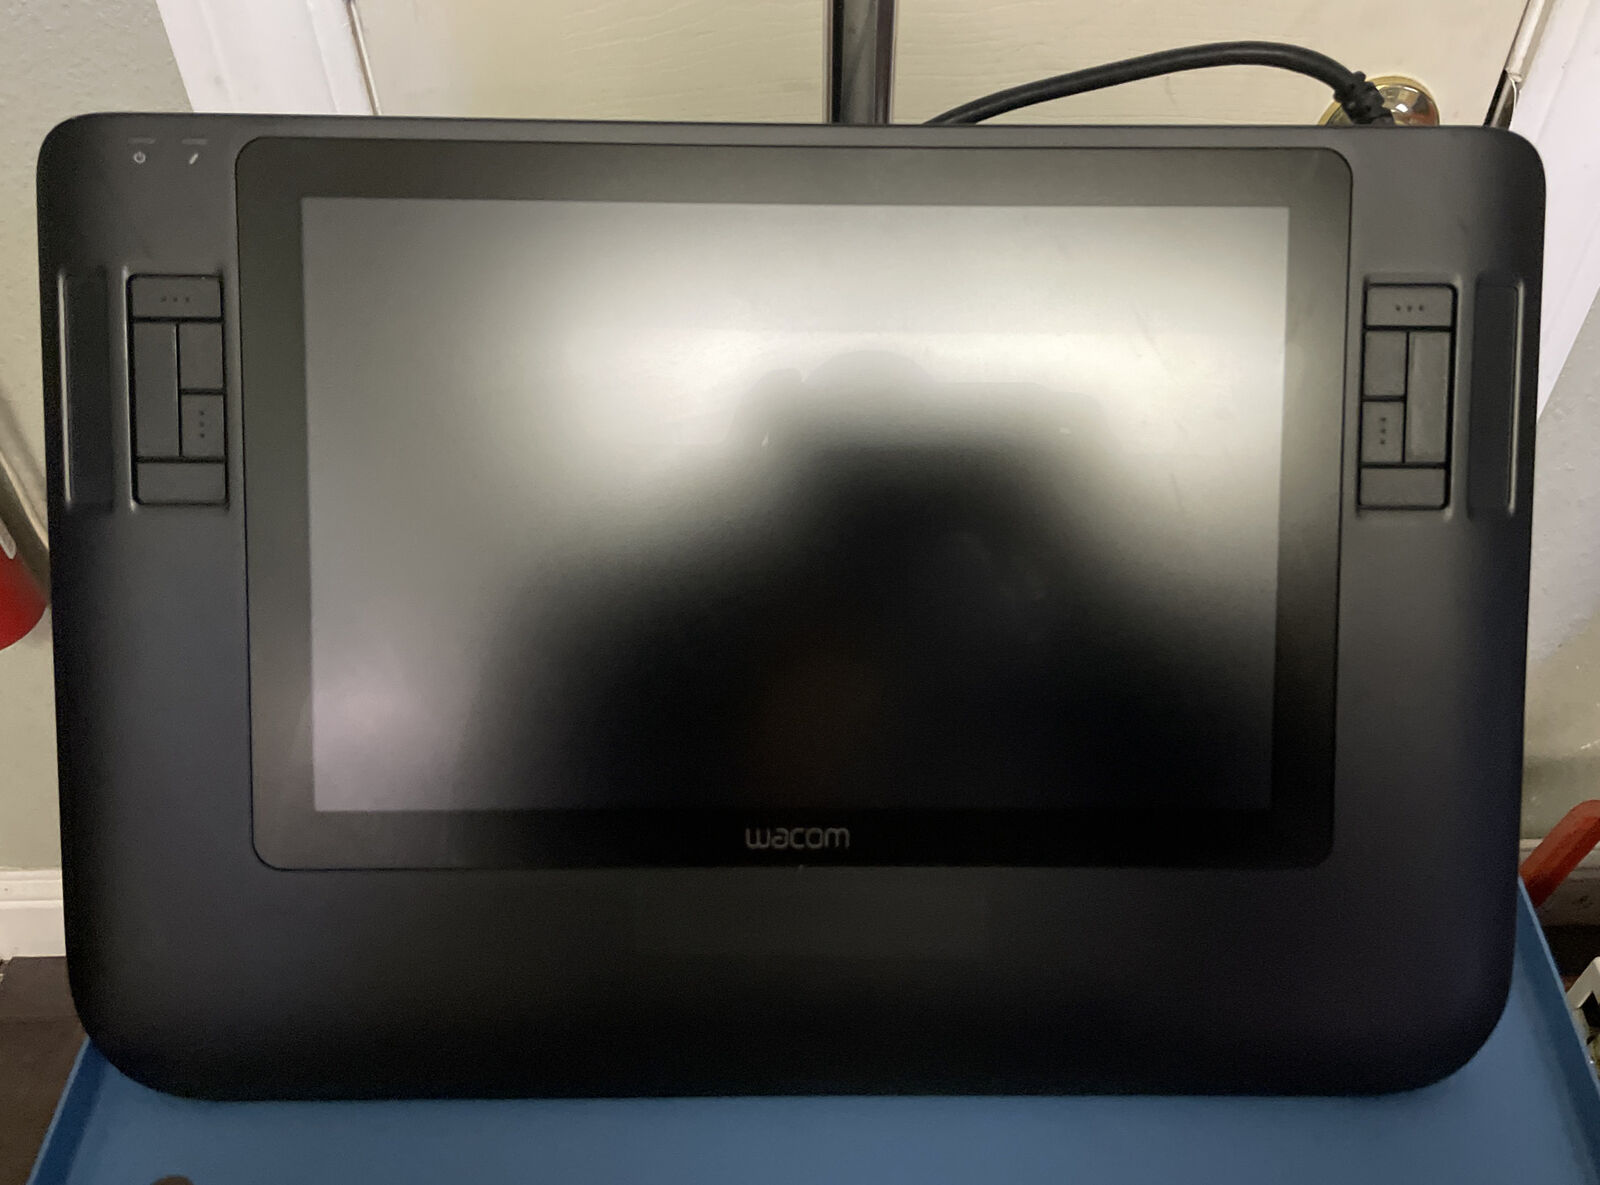 Wacom DTZ-1200W Cintiq Display Graphic Drawing Tablet w/ Stand, Converter & Pen